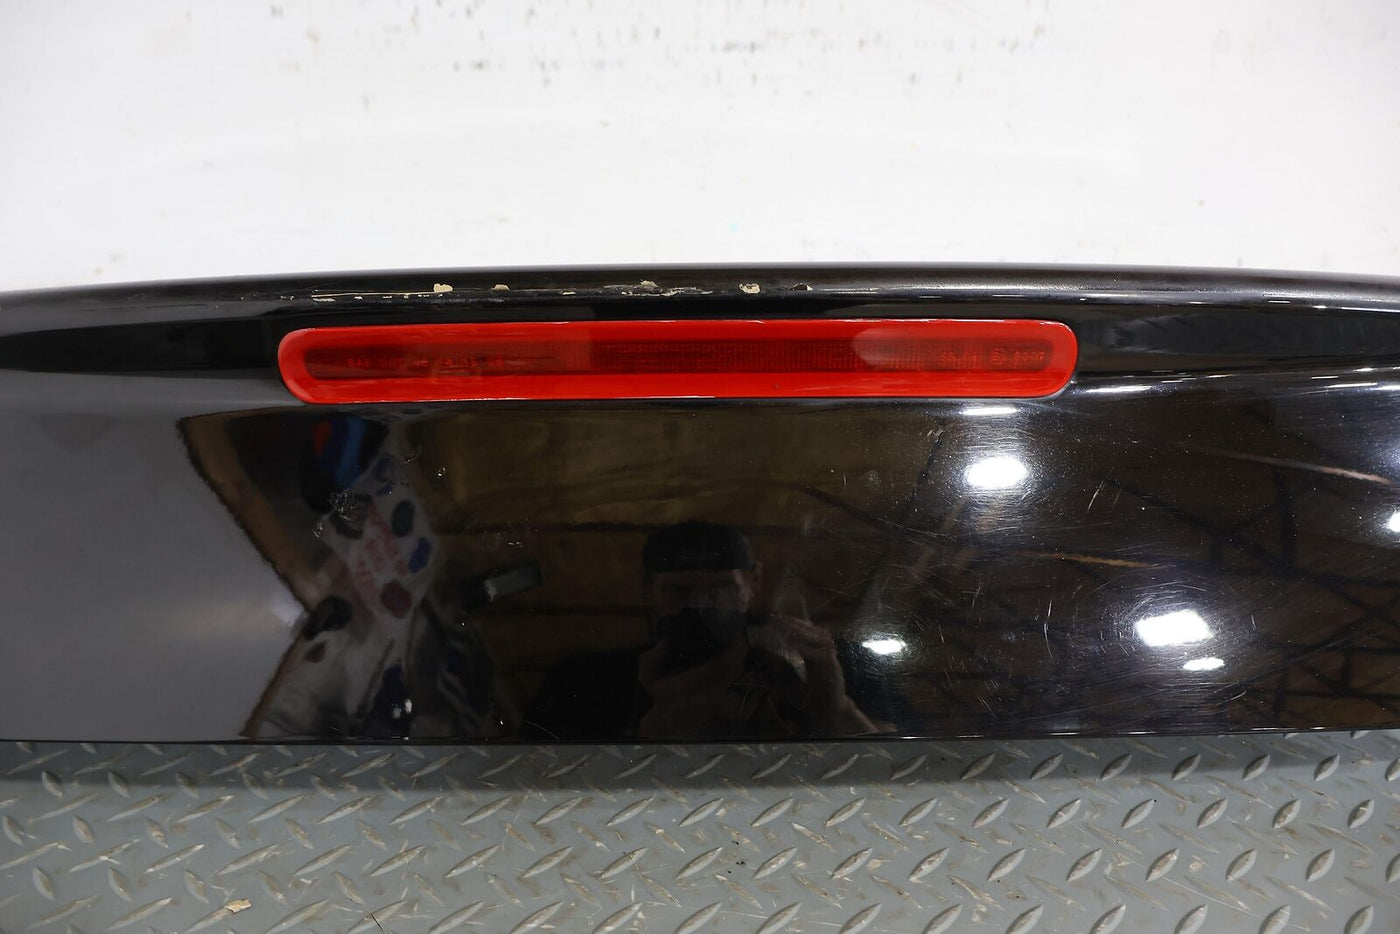 14-15 Chevy Camaro ZL1 Coupe OEM Trunk Deck Lid (Black GBA) Spoiler Not Included